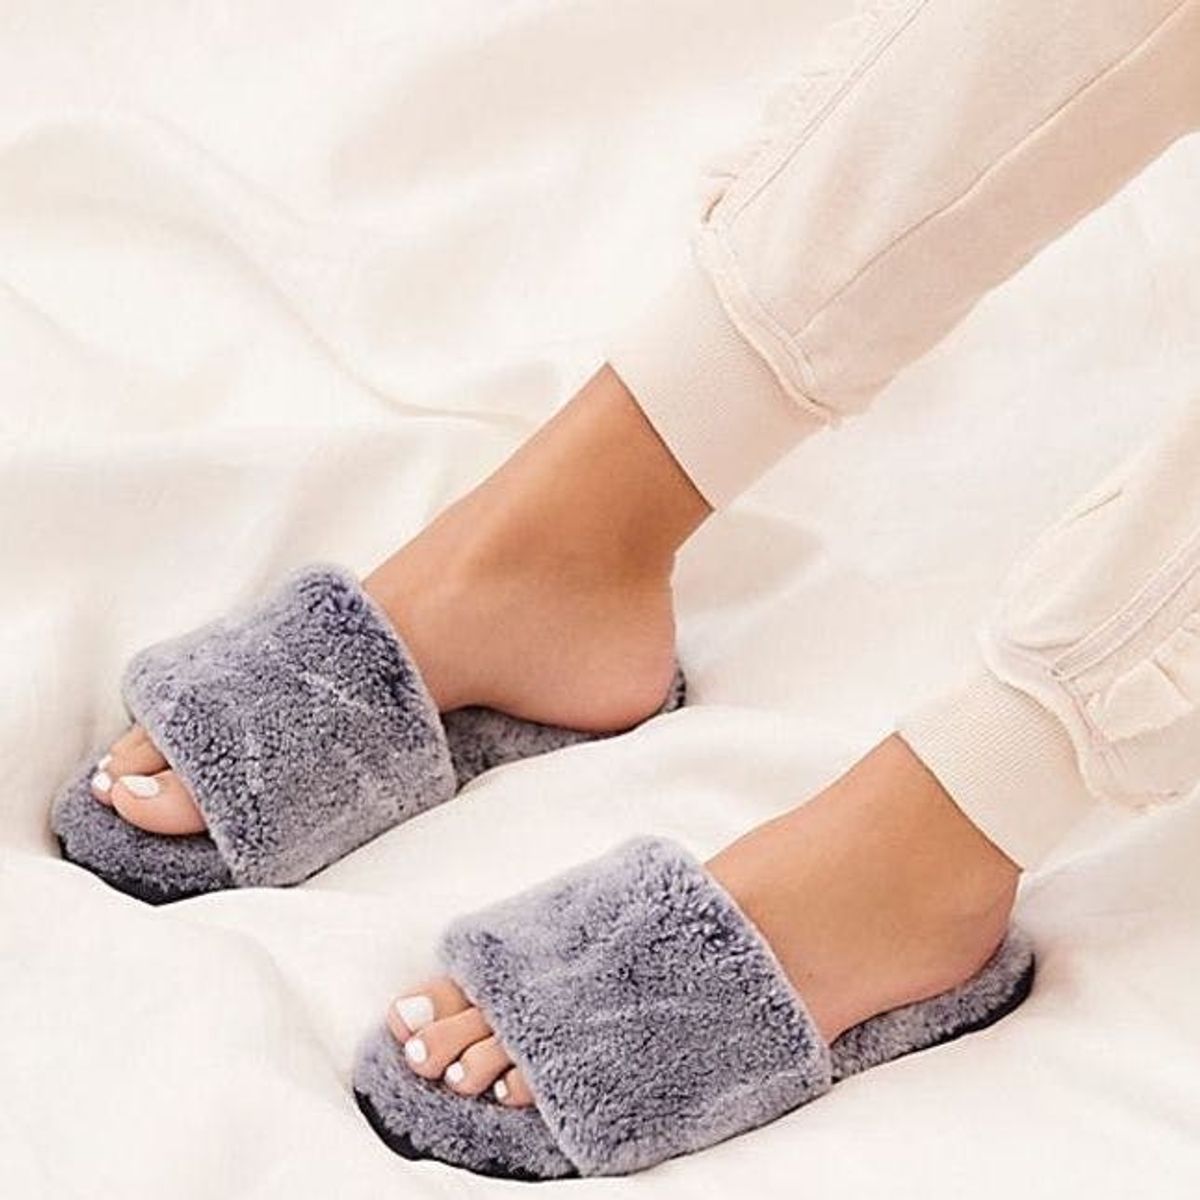 12 Cozy Pairs of Slippers You’ll Love in This Winter